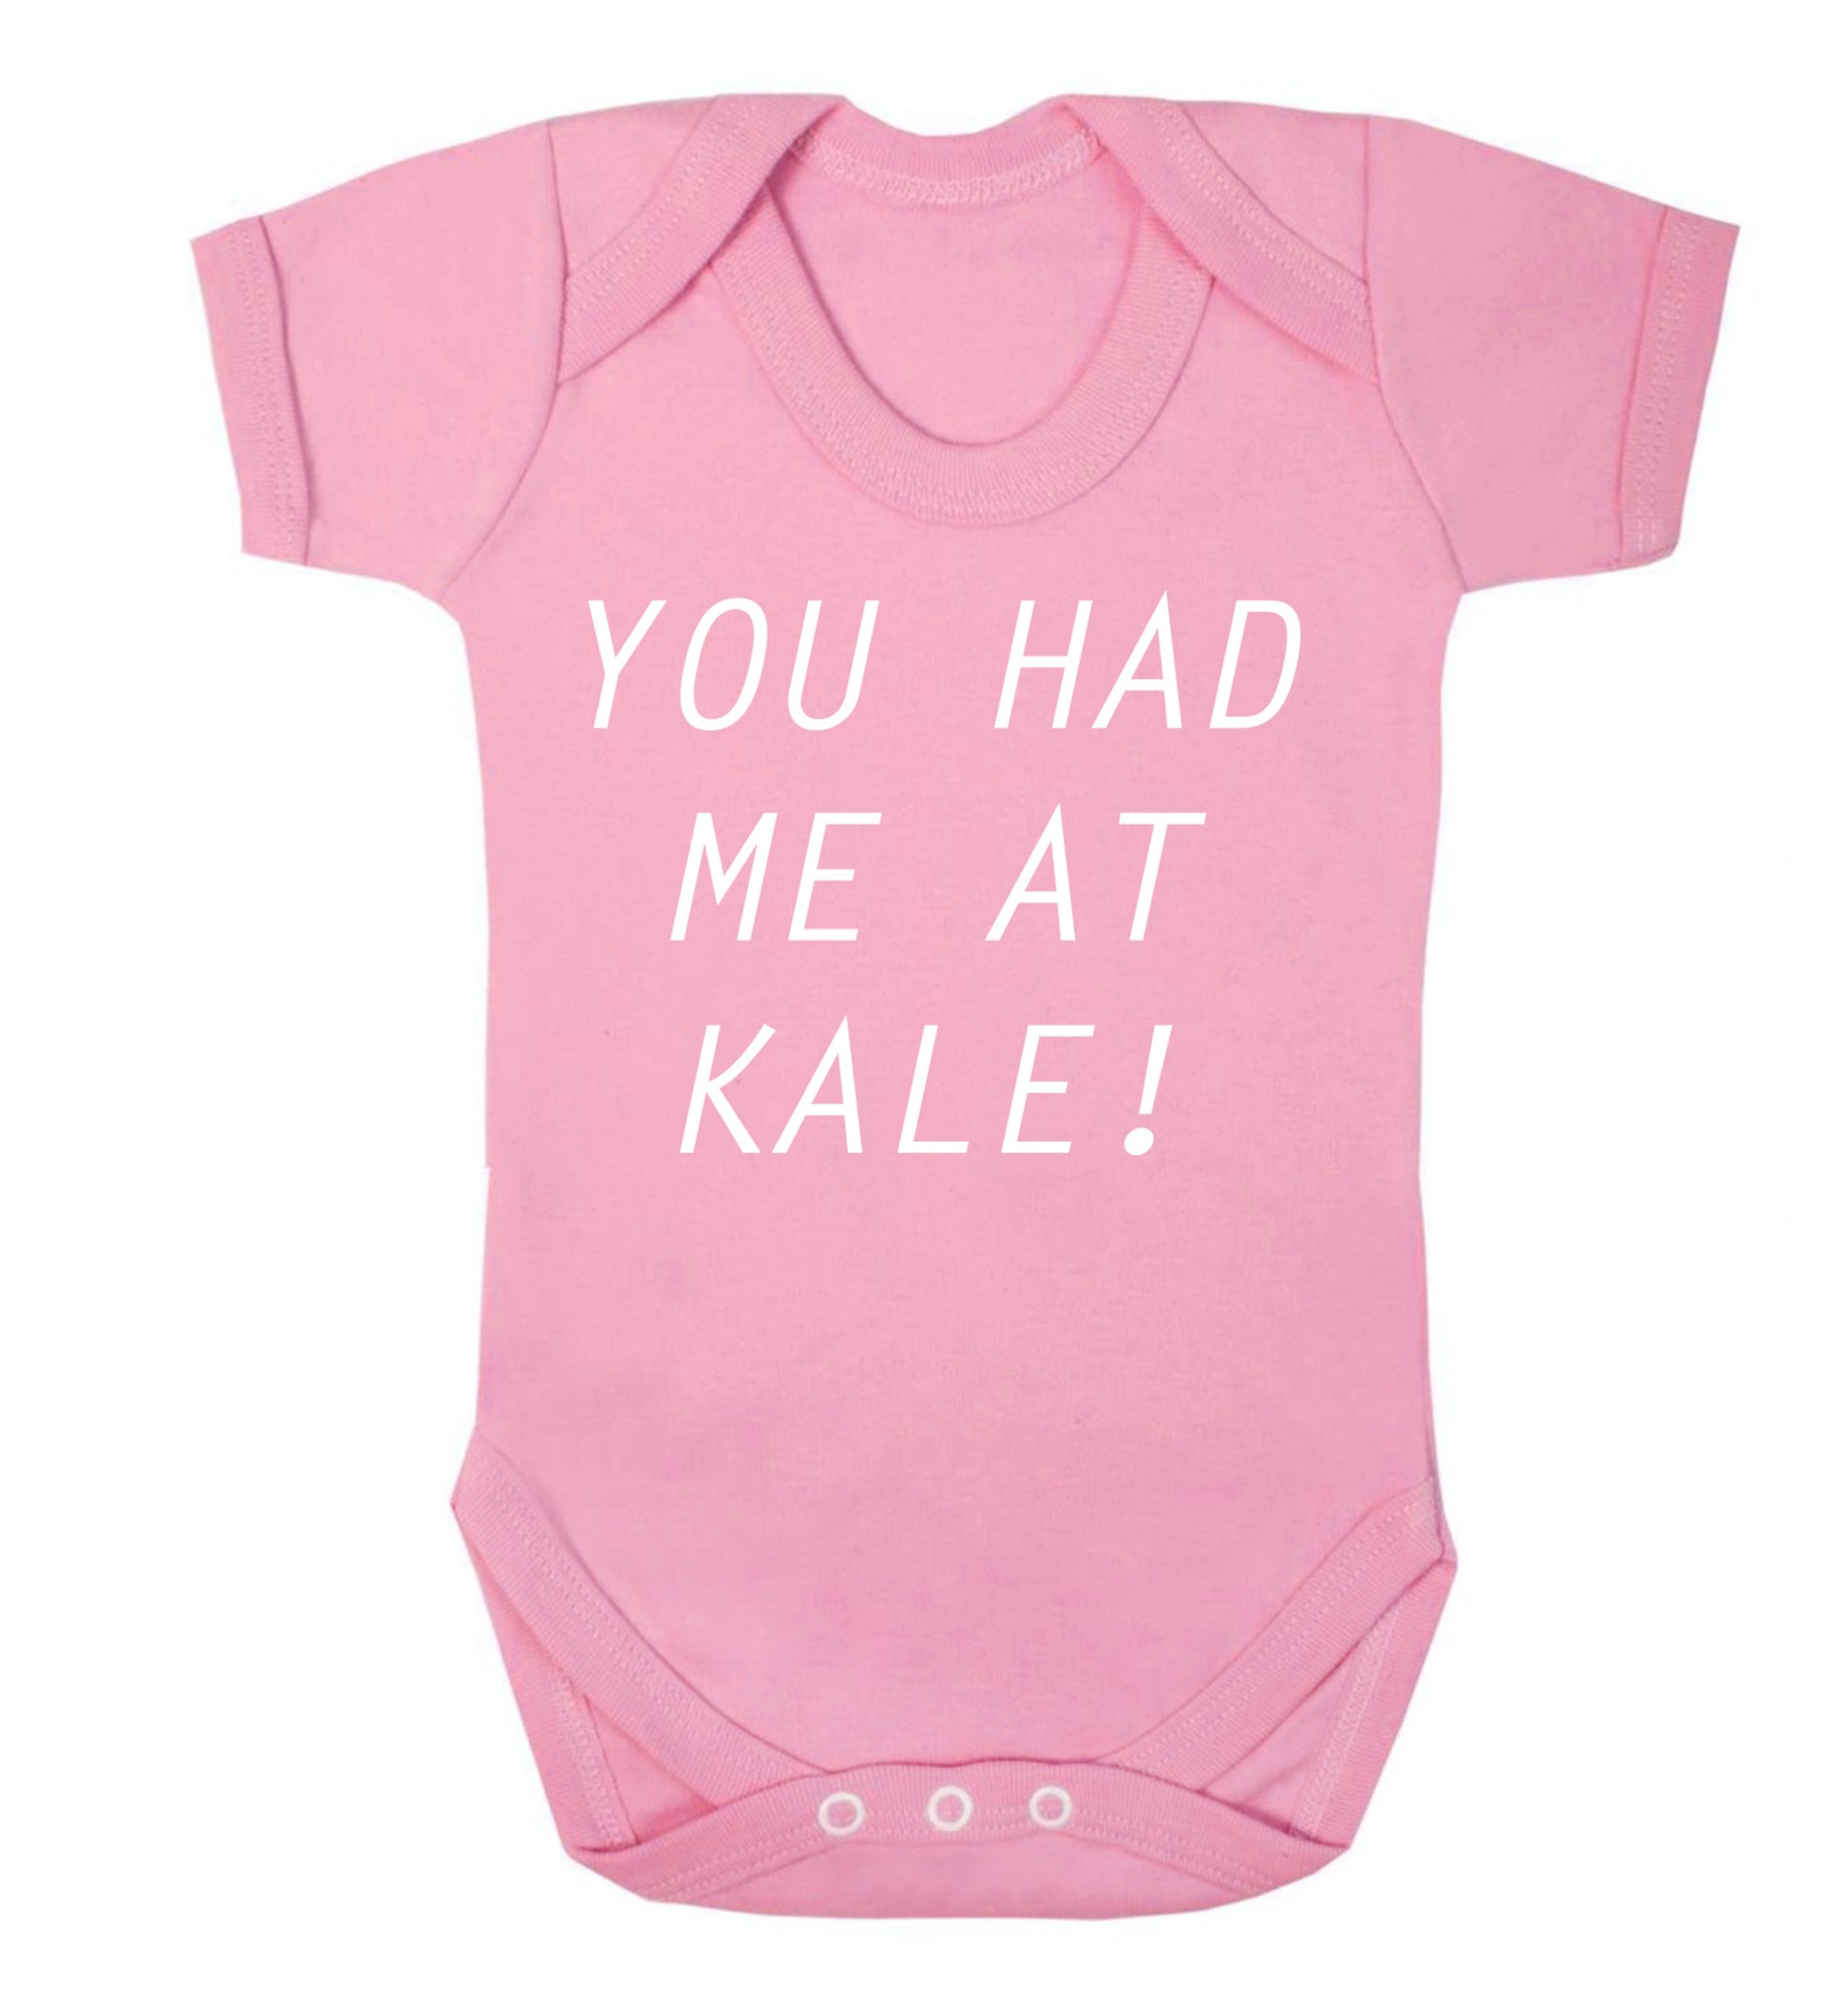 You had me at kale Baby Vest pale pink 18-24 months